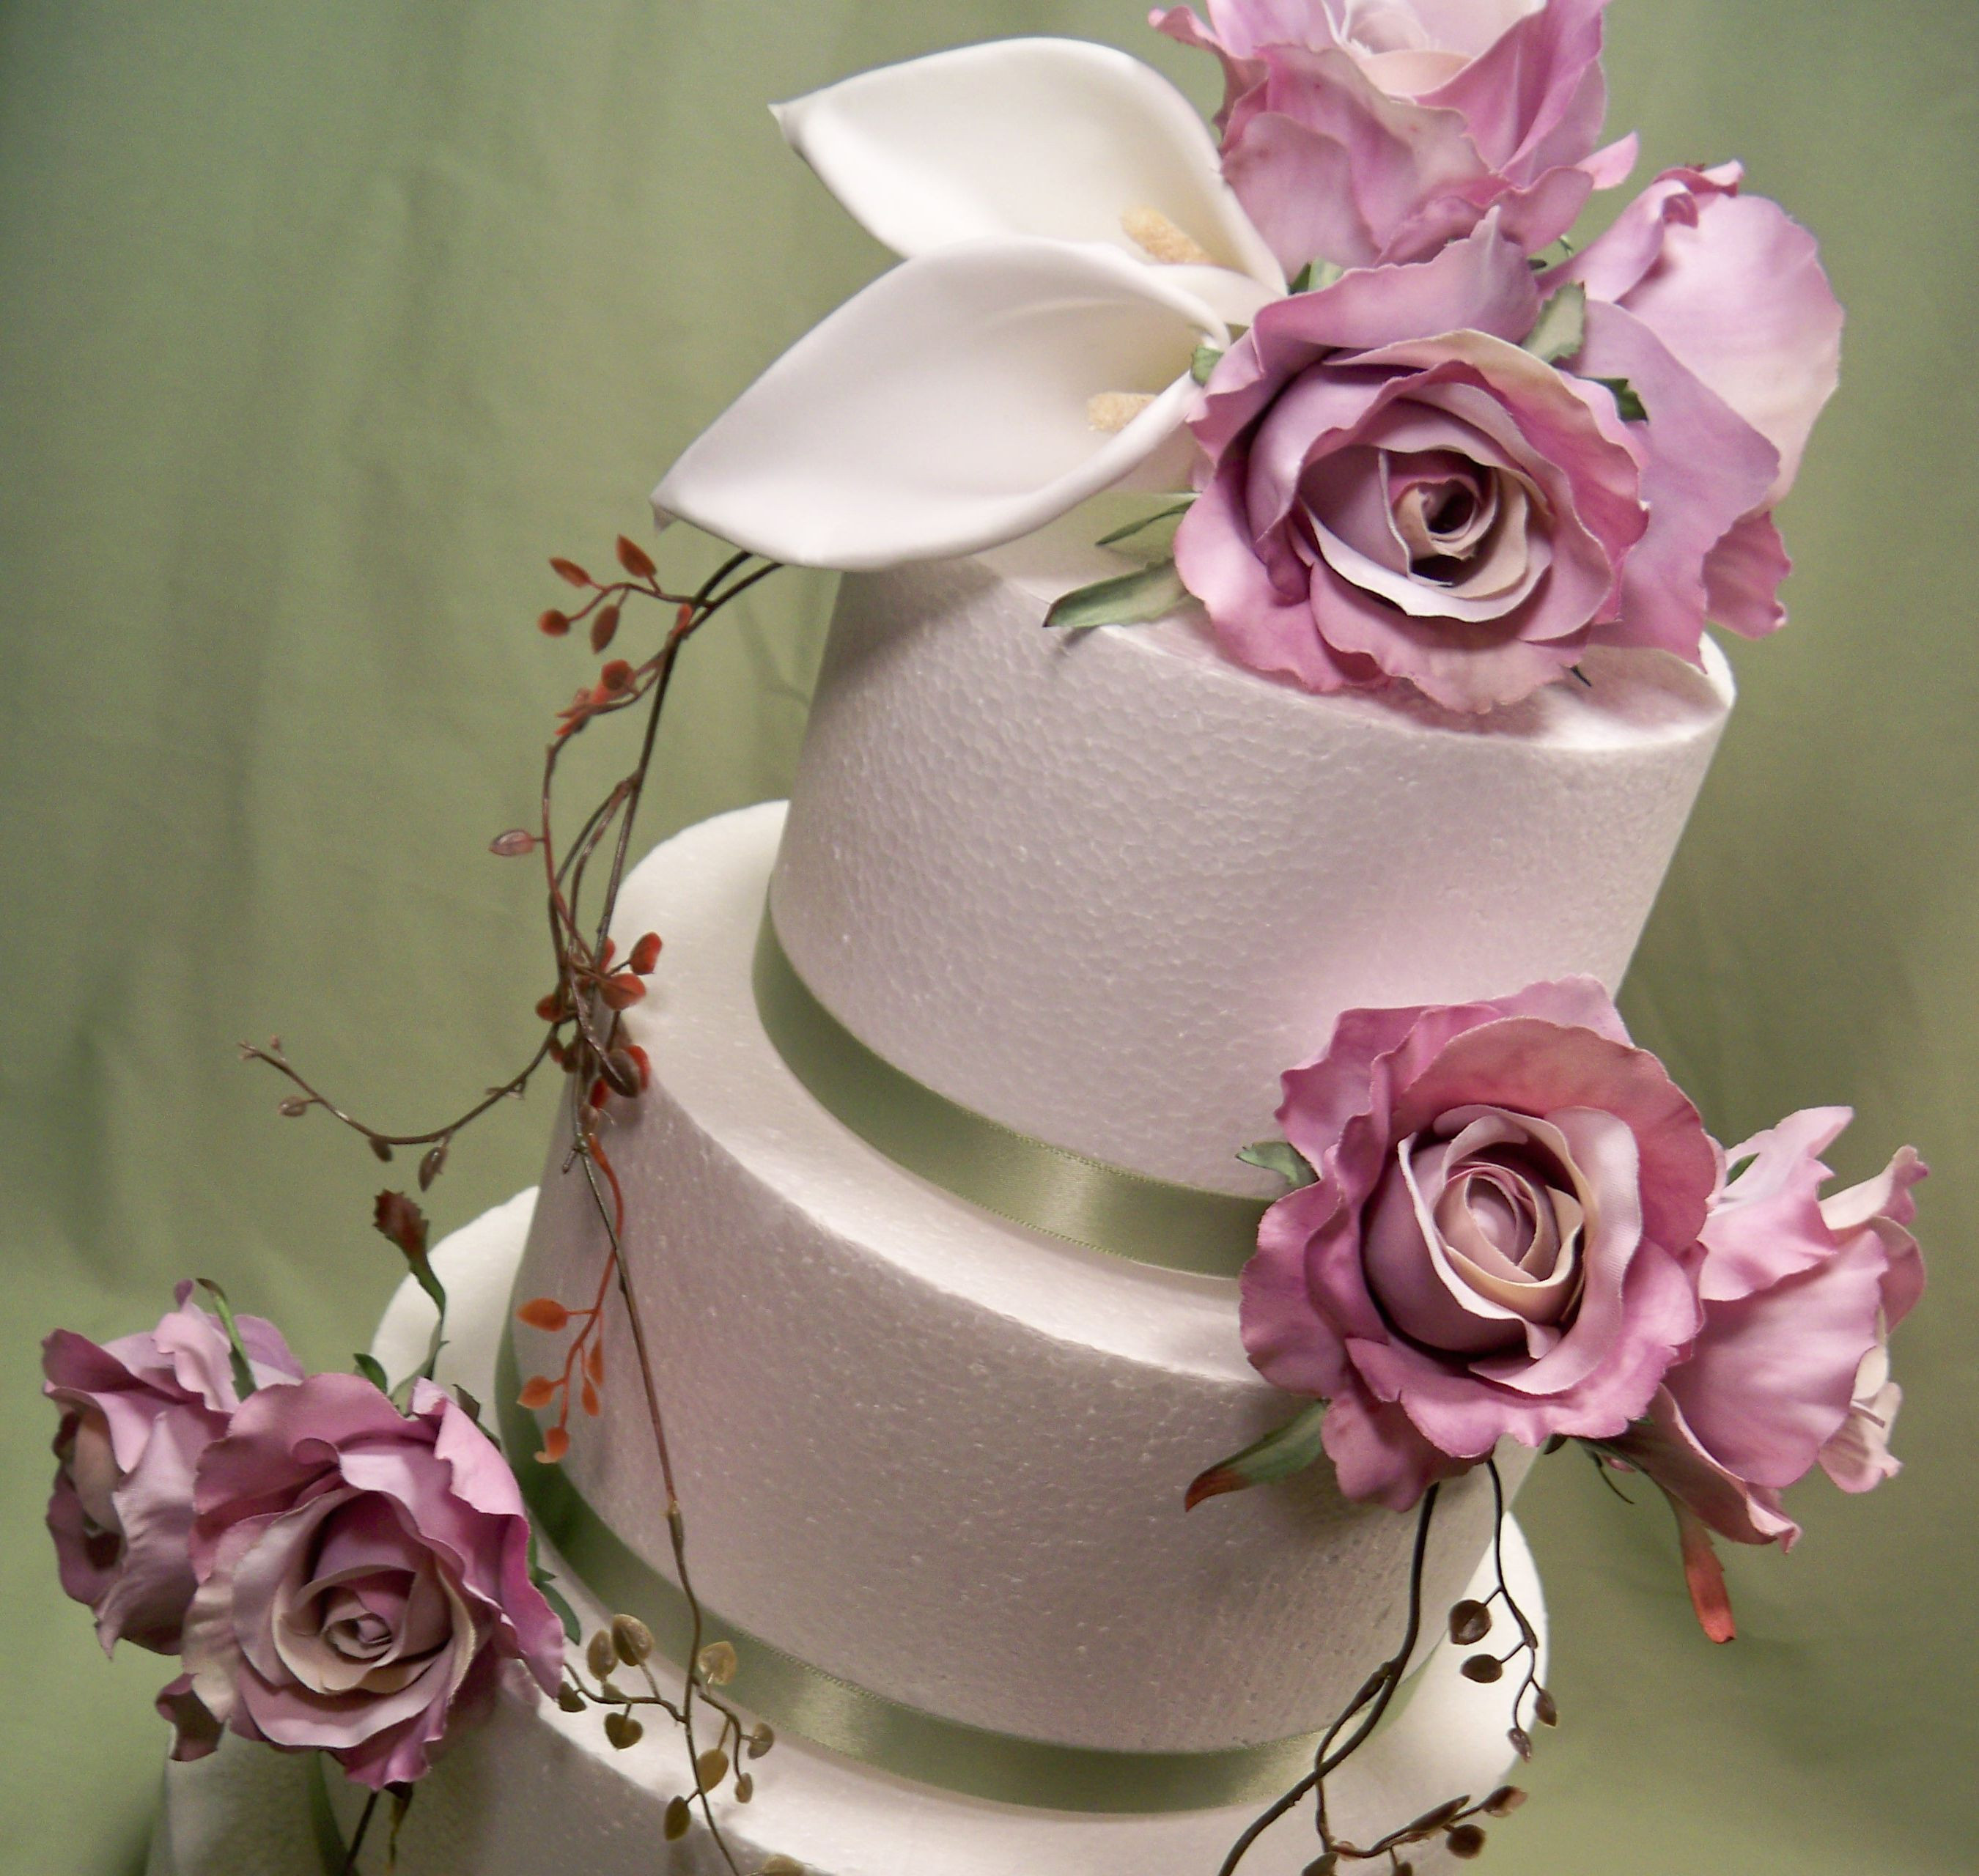 Silk Flowers For Wedding Cakes
 Lavender Rose and White Calla Lily Silk Flower Wedding